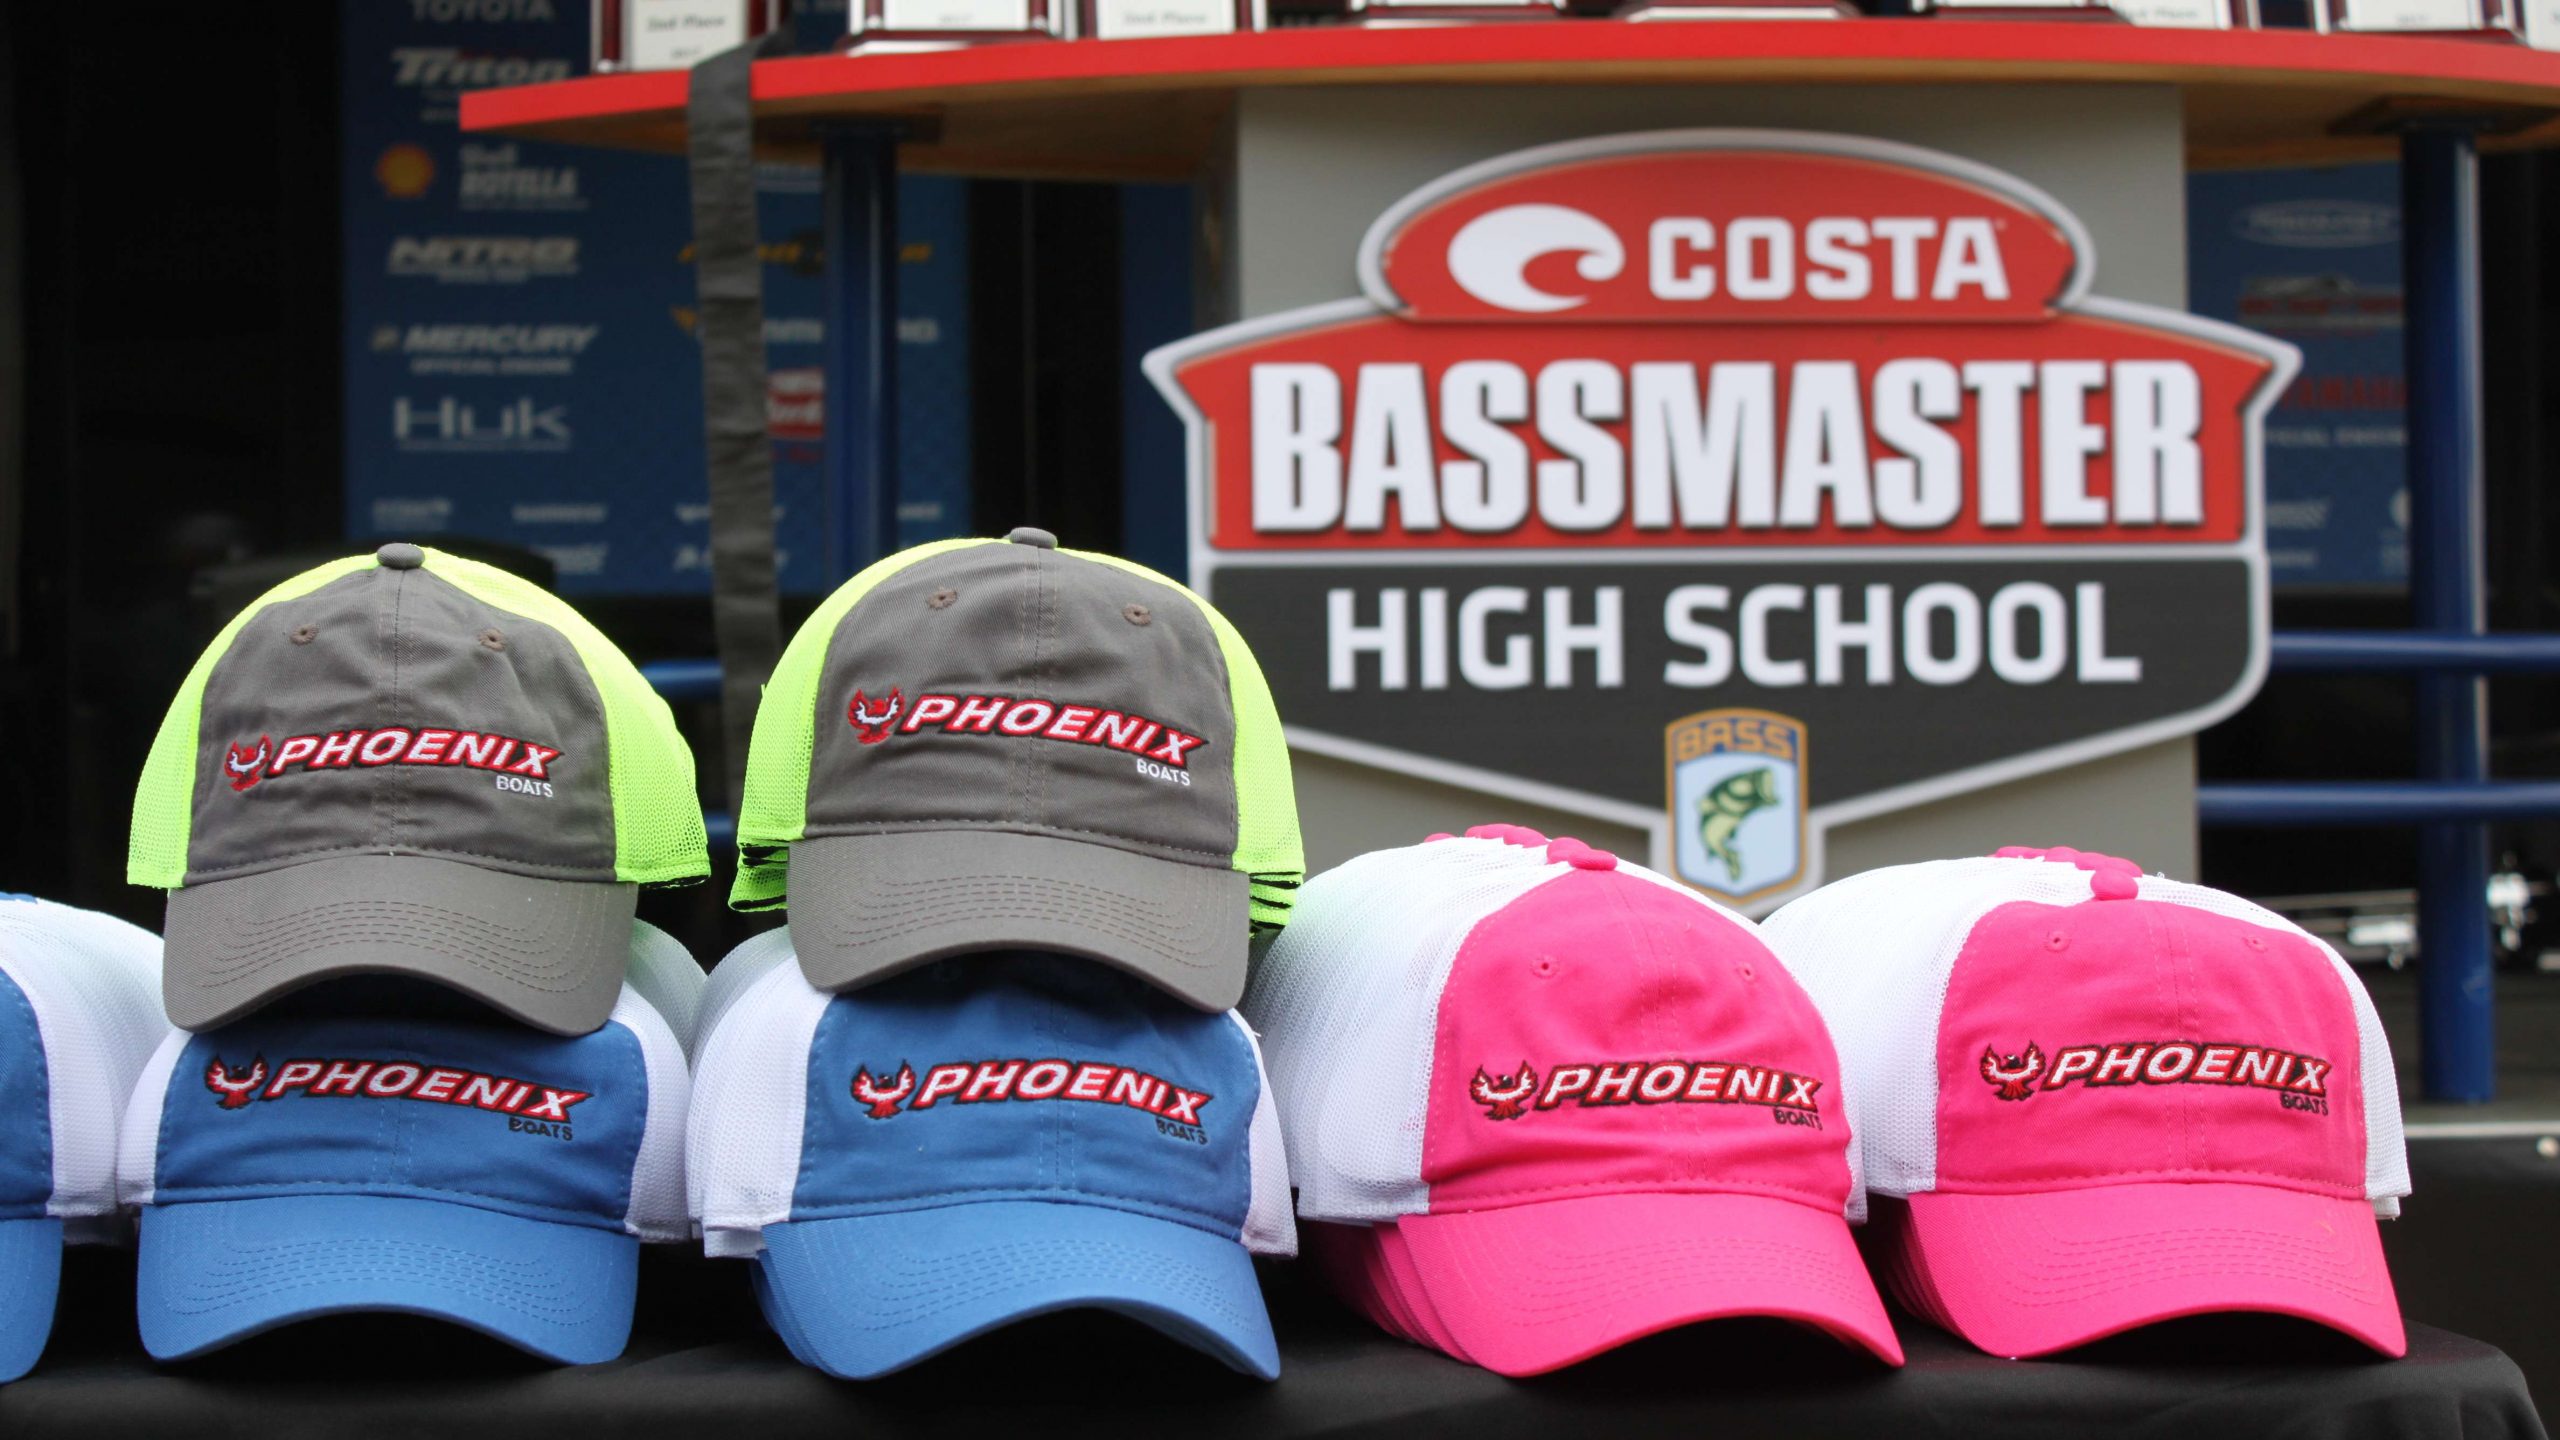 Phoenix Boats is a sponsor and a variety of brightly colored
hats were handed out to the high school anglers on Friday.